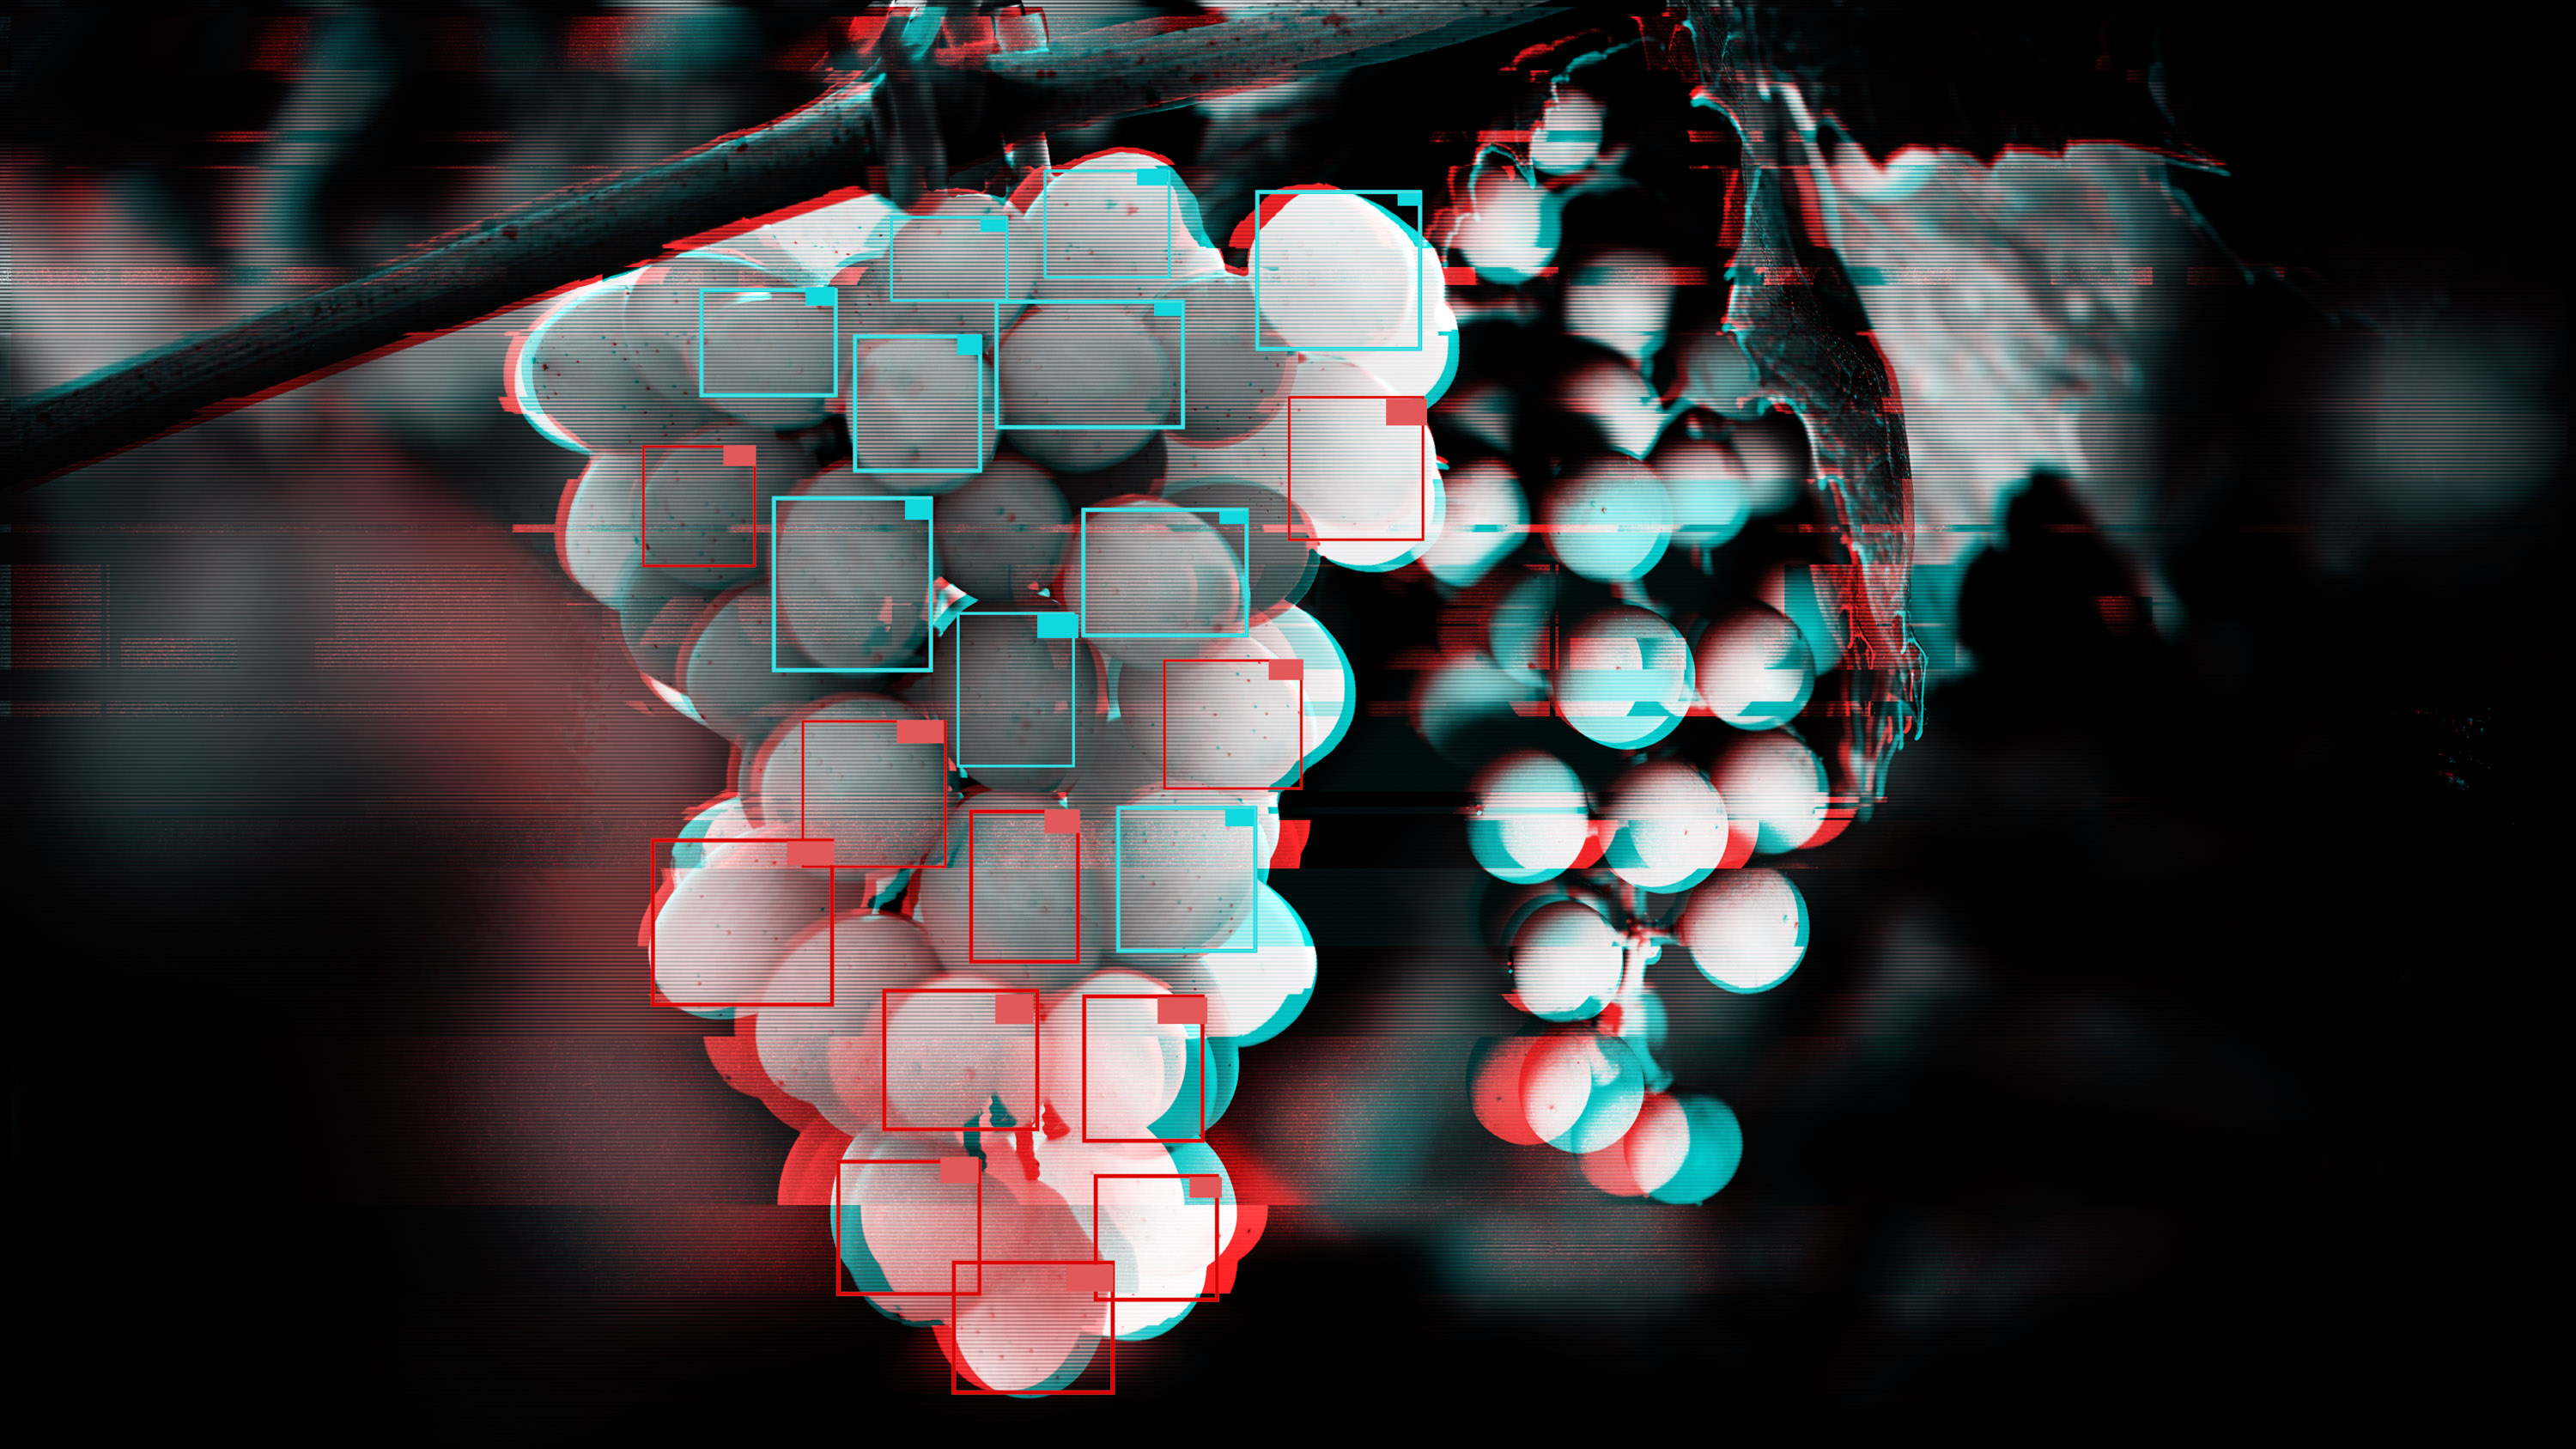 grapes on the vine with a anaglyph glitch effect. Facial recognition style boxes highlight each individual grape.